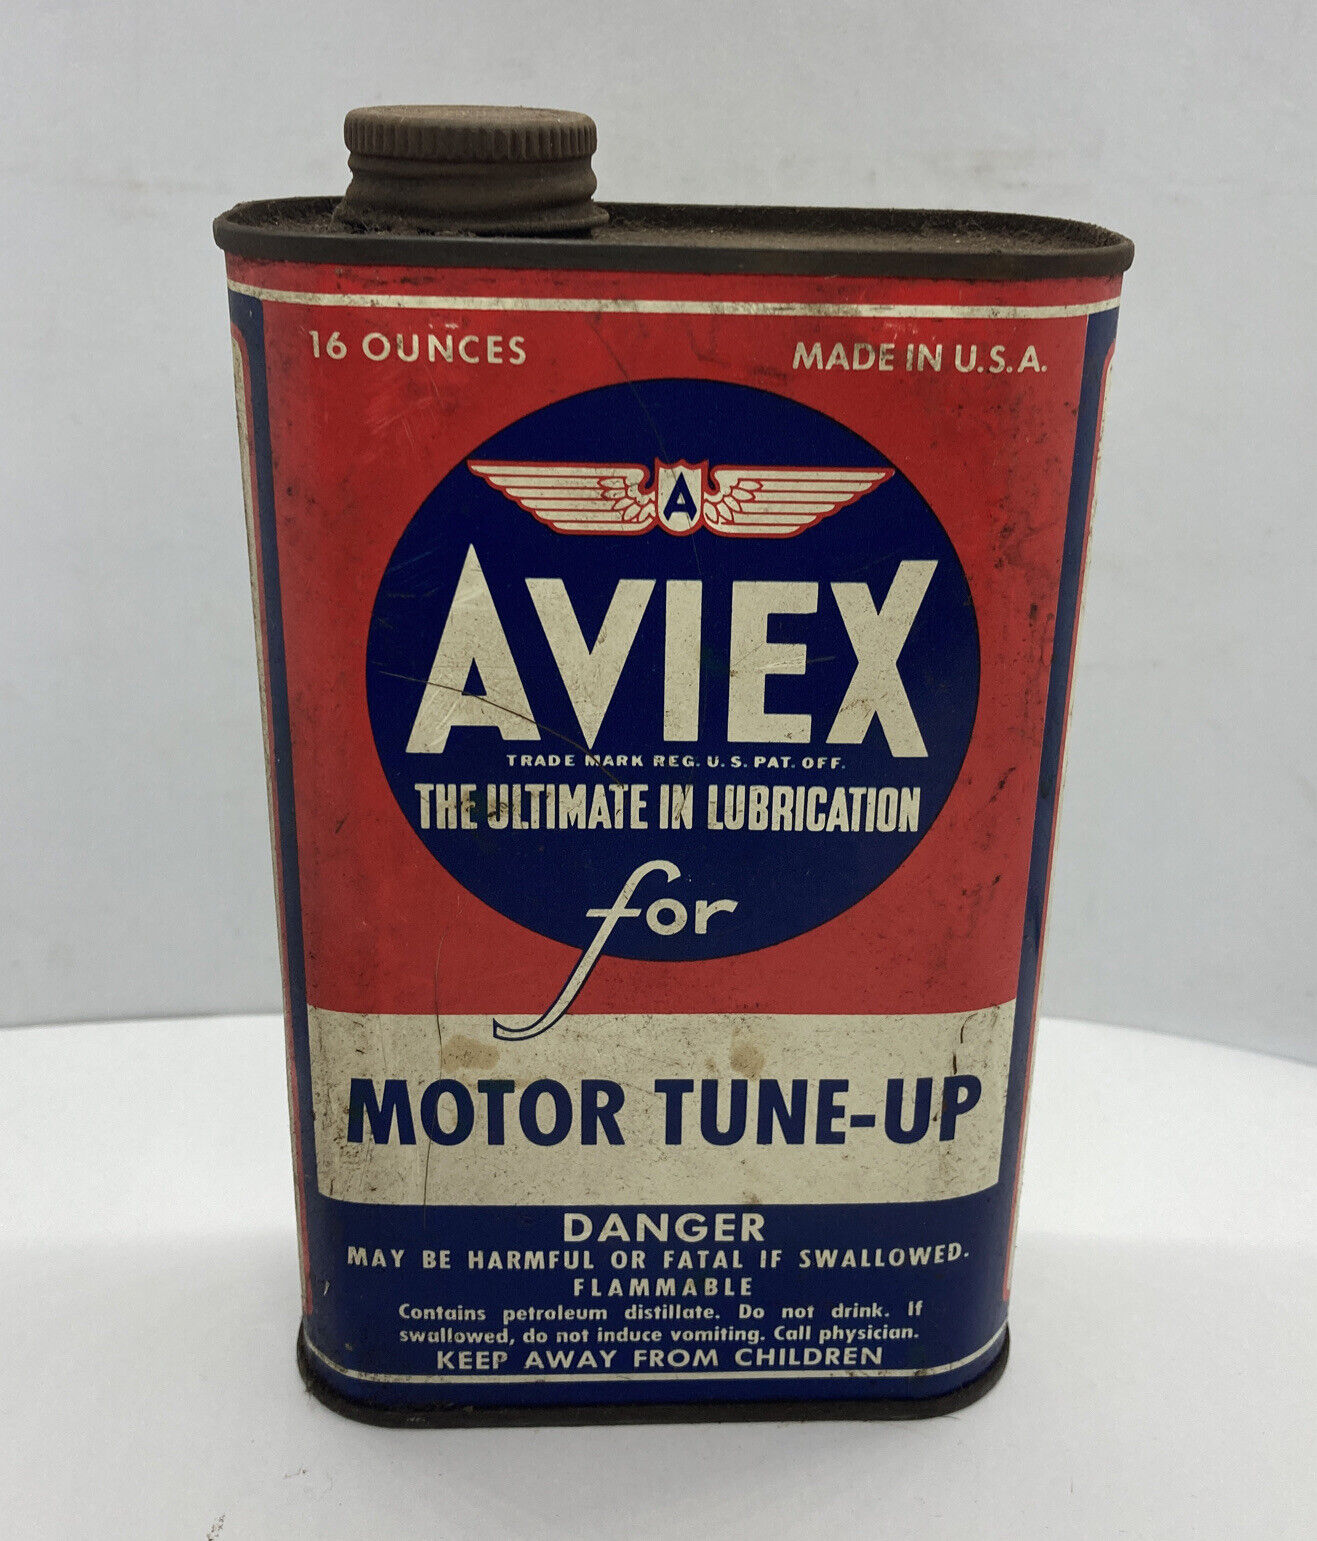 VINTAGE AVIEX MOTOR TUNE-UP CAN 16 OZ Sealed Niles, Michigan As Shown